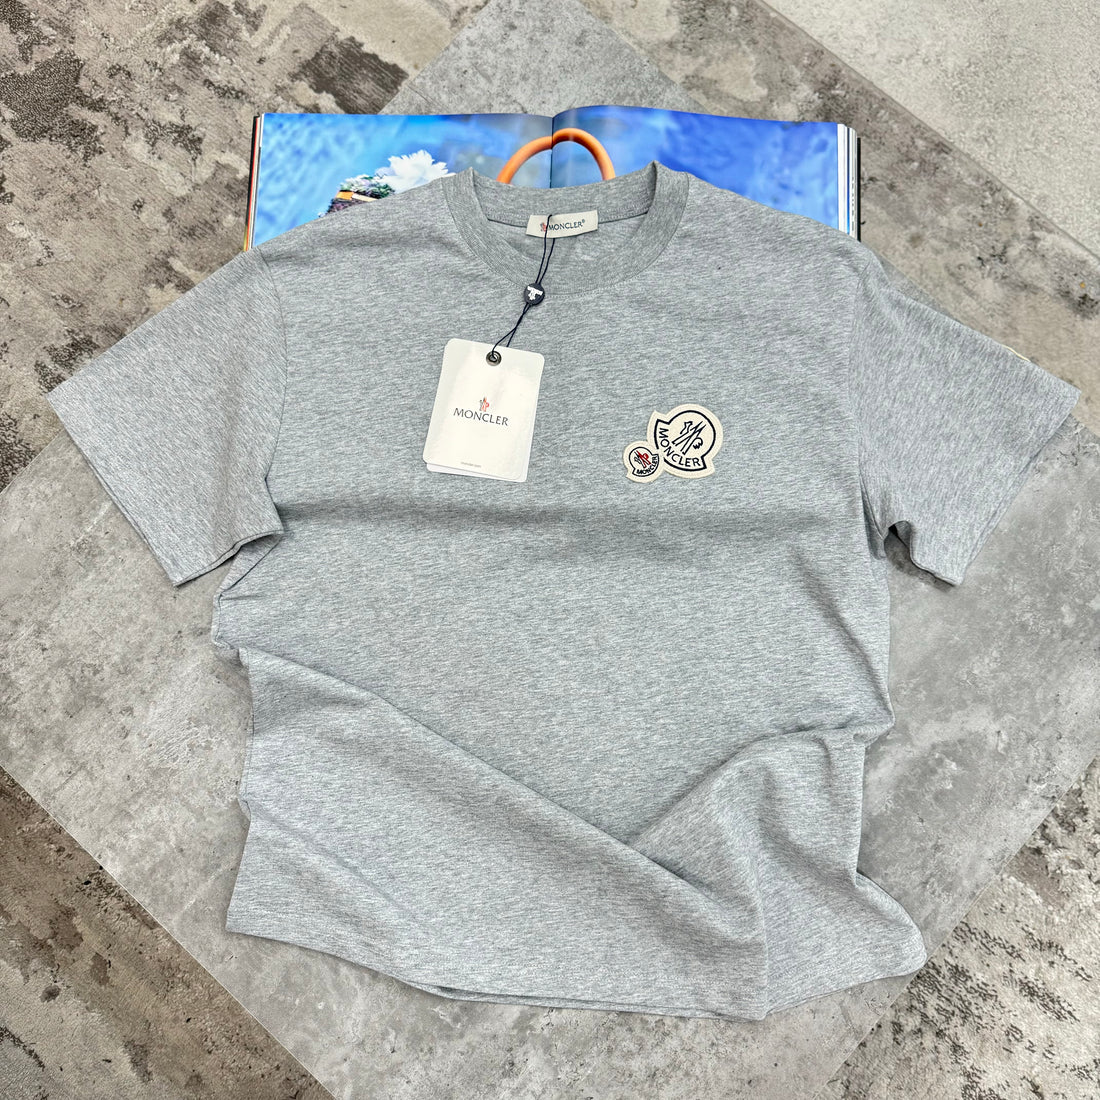 Moncler Tshirts (click for latest available Tshirts)